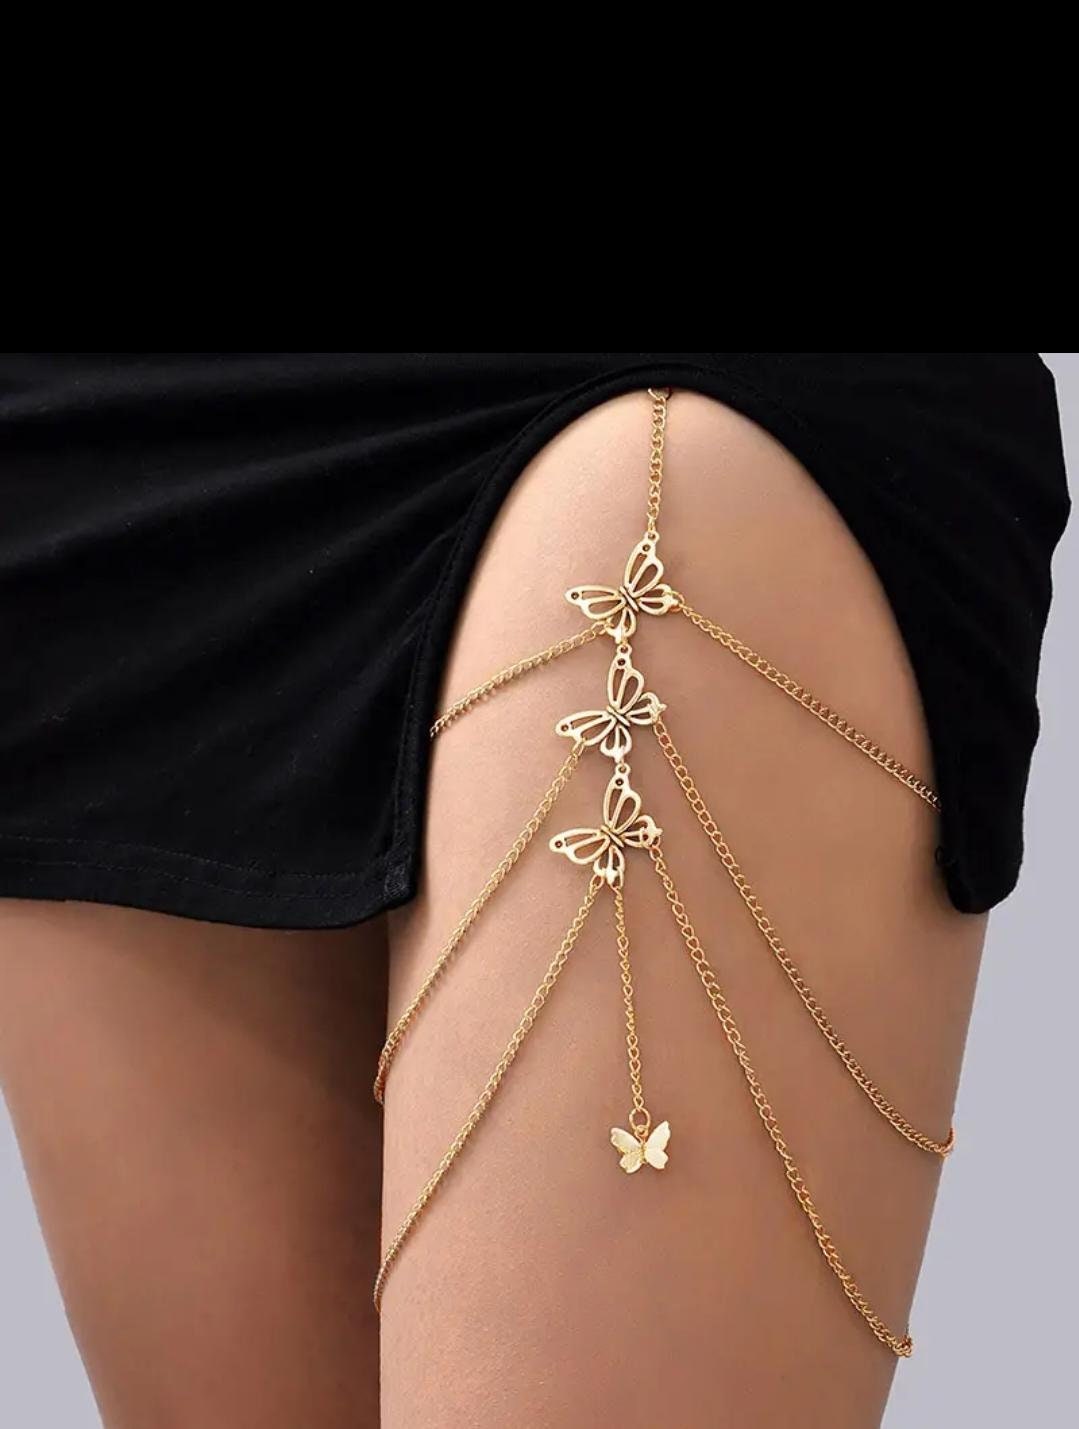 thigh bracelet - Buy thigh bracelet at Best Price in Malaysia |  h5.lazada.com.my